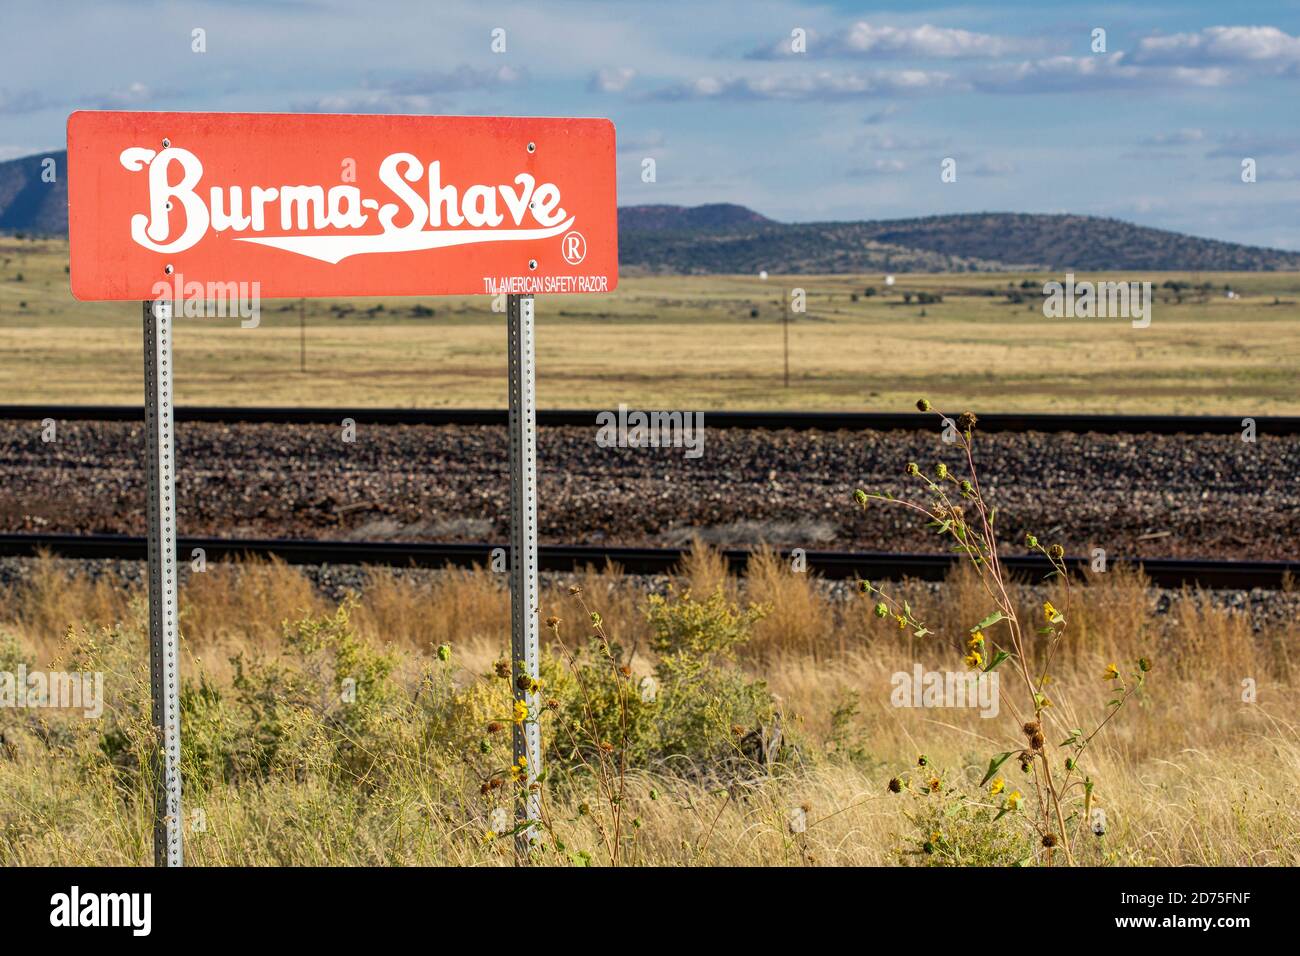 Route 66 USA - September 29 2015.Burma Shave, historic American brand  famous for its advertising gimmick of posting humorous rhyming poems on small s Stock Photo